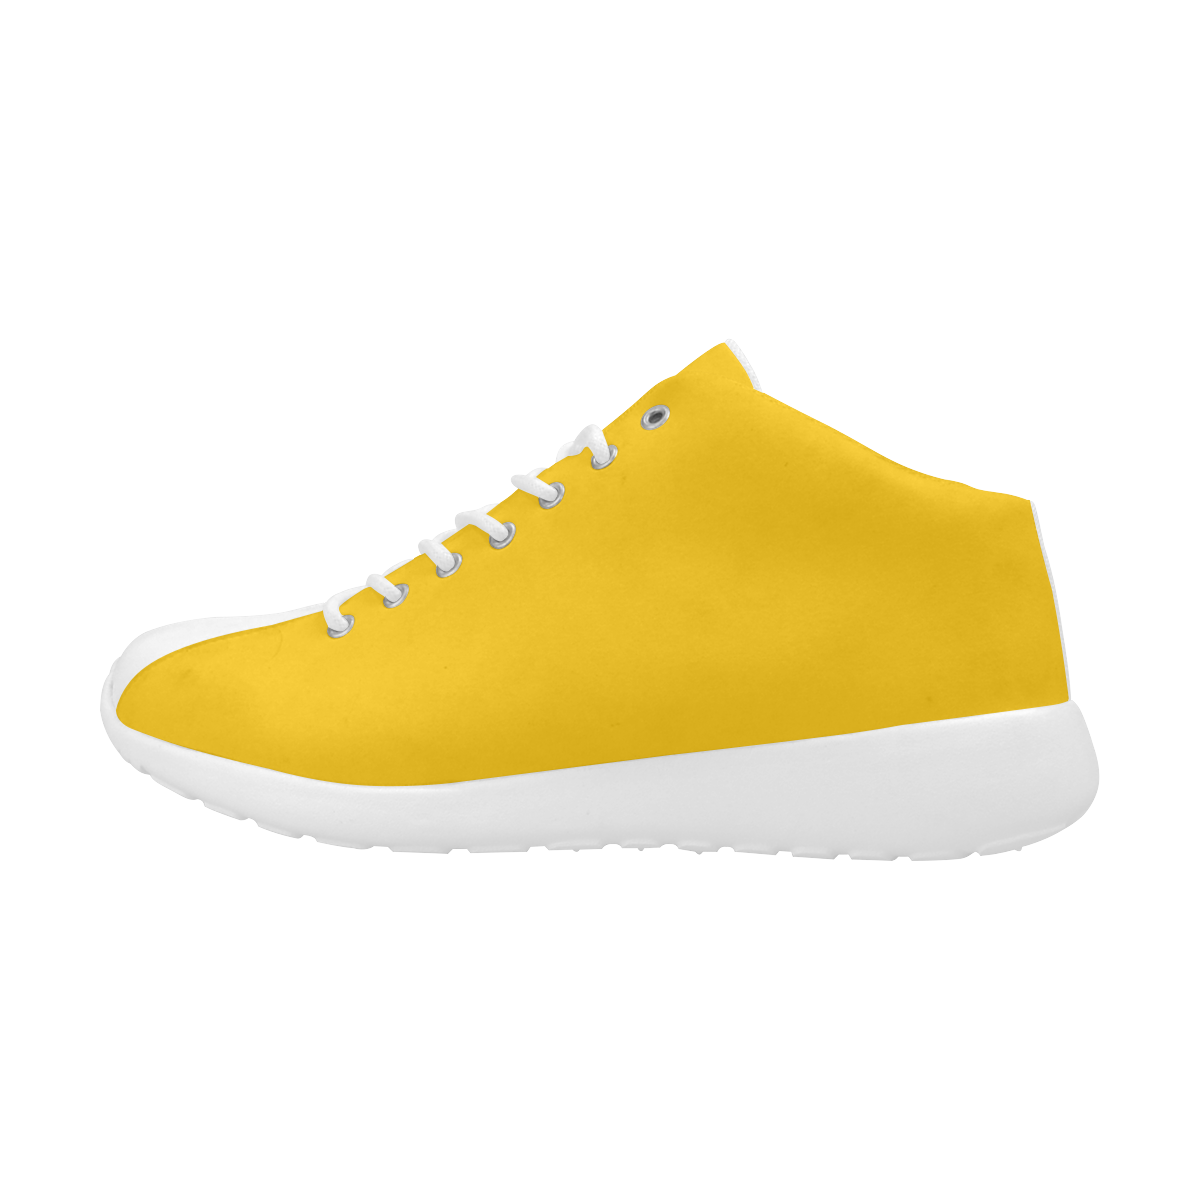 Darling Dandelion Solid Colored Women's Basketball Training Shoes/Large Size (Model 47502)